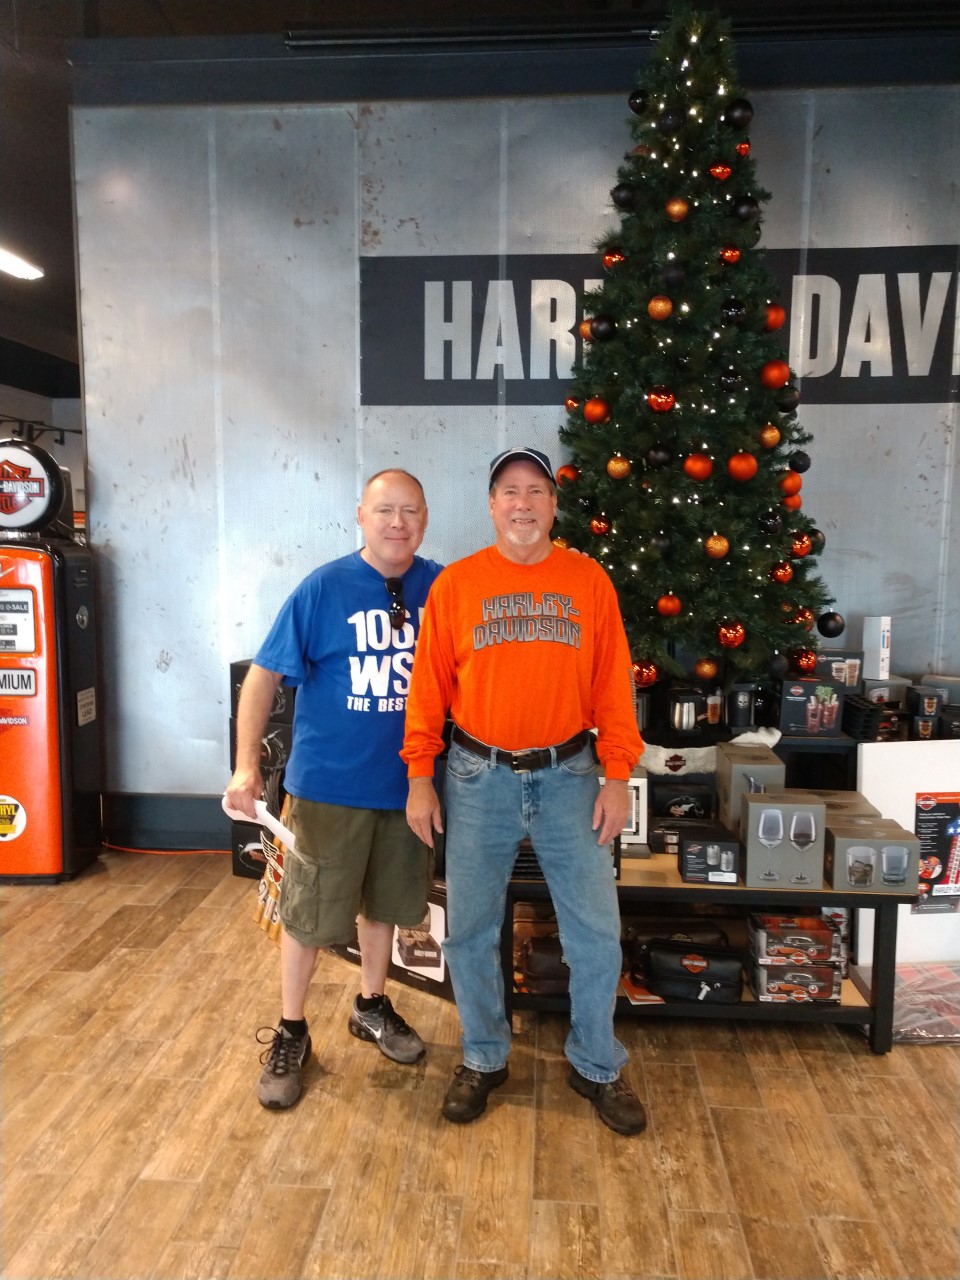 Congratulations to the Winners in the Great Gear Giveaway with Boneyard Harley-Davidson